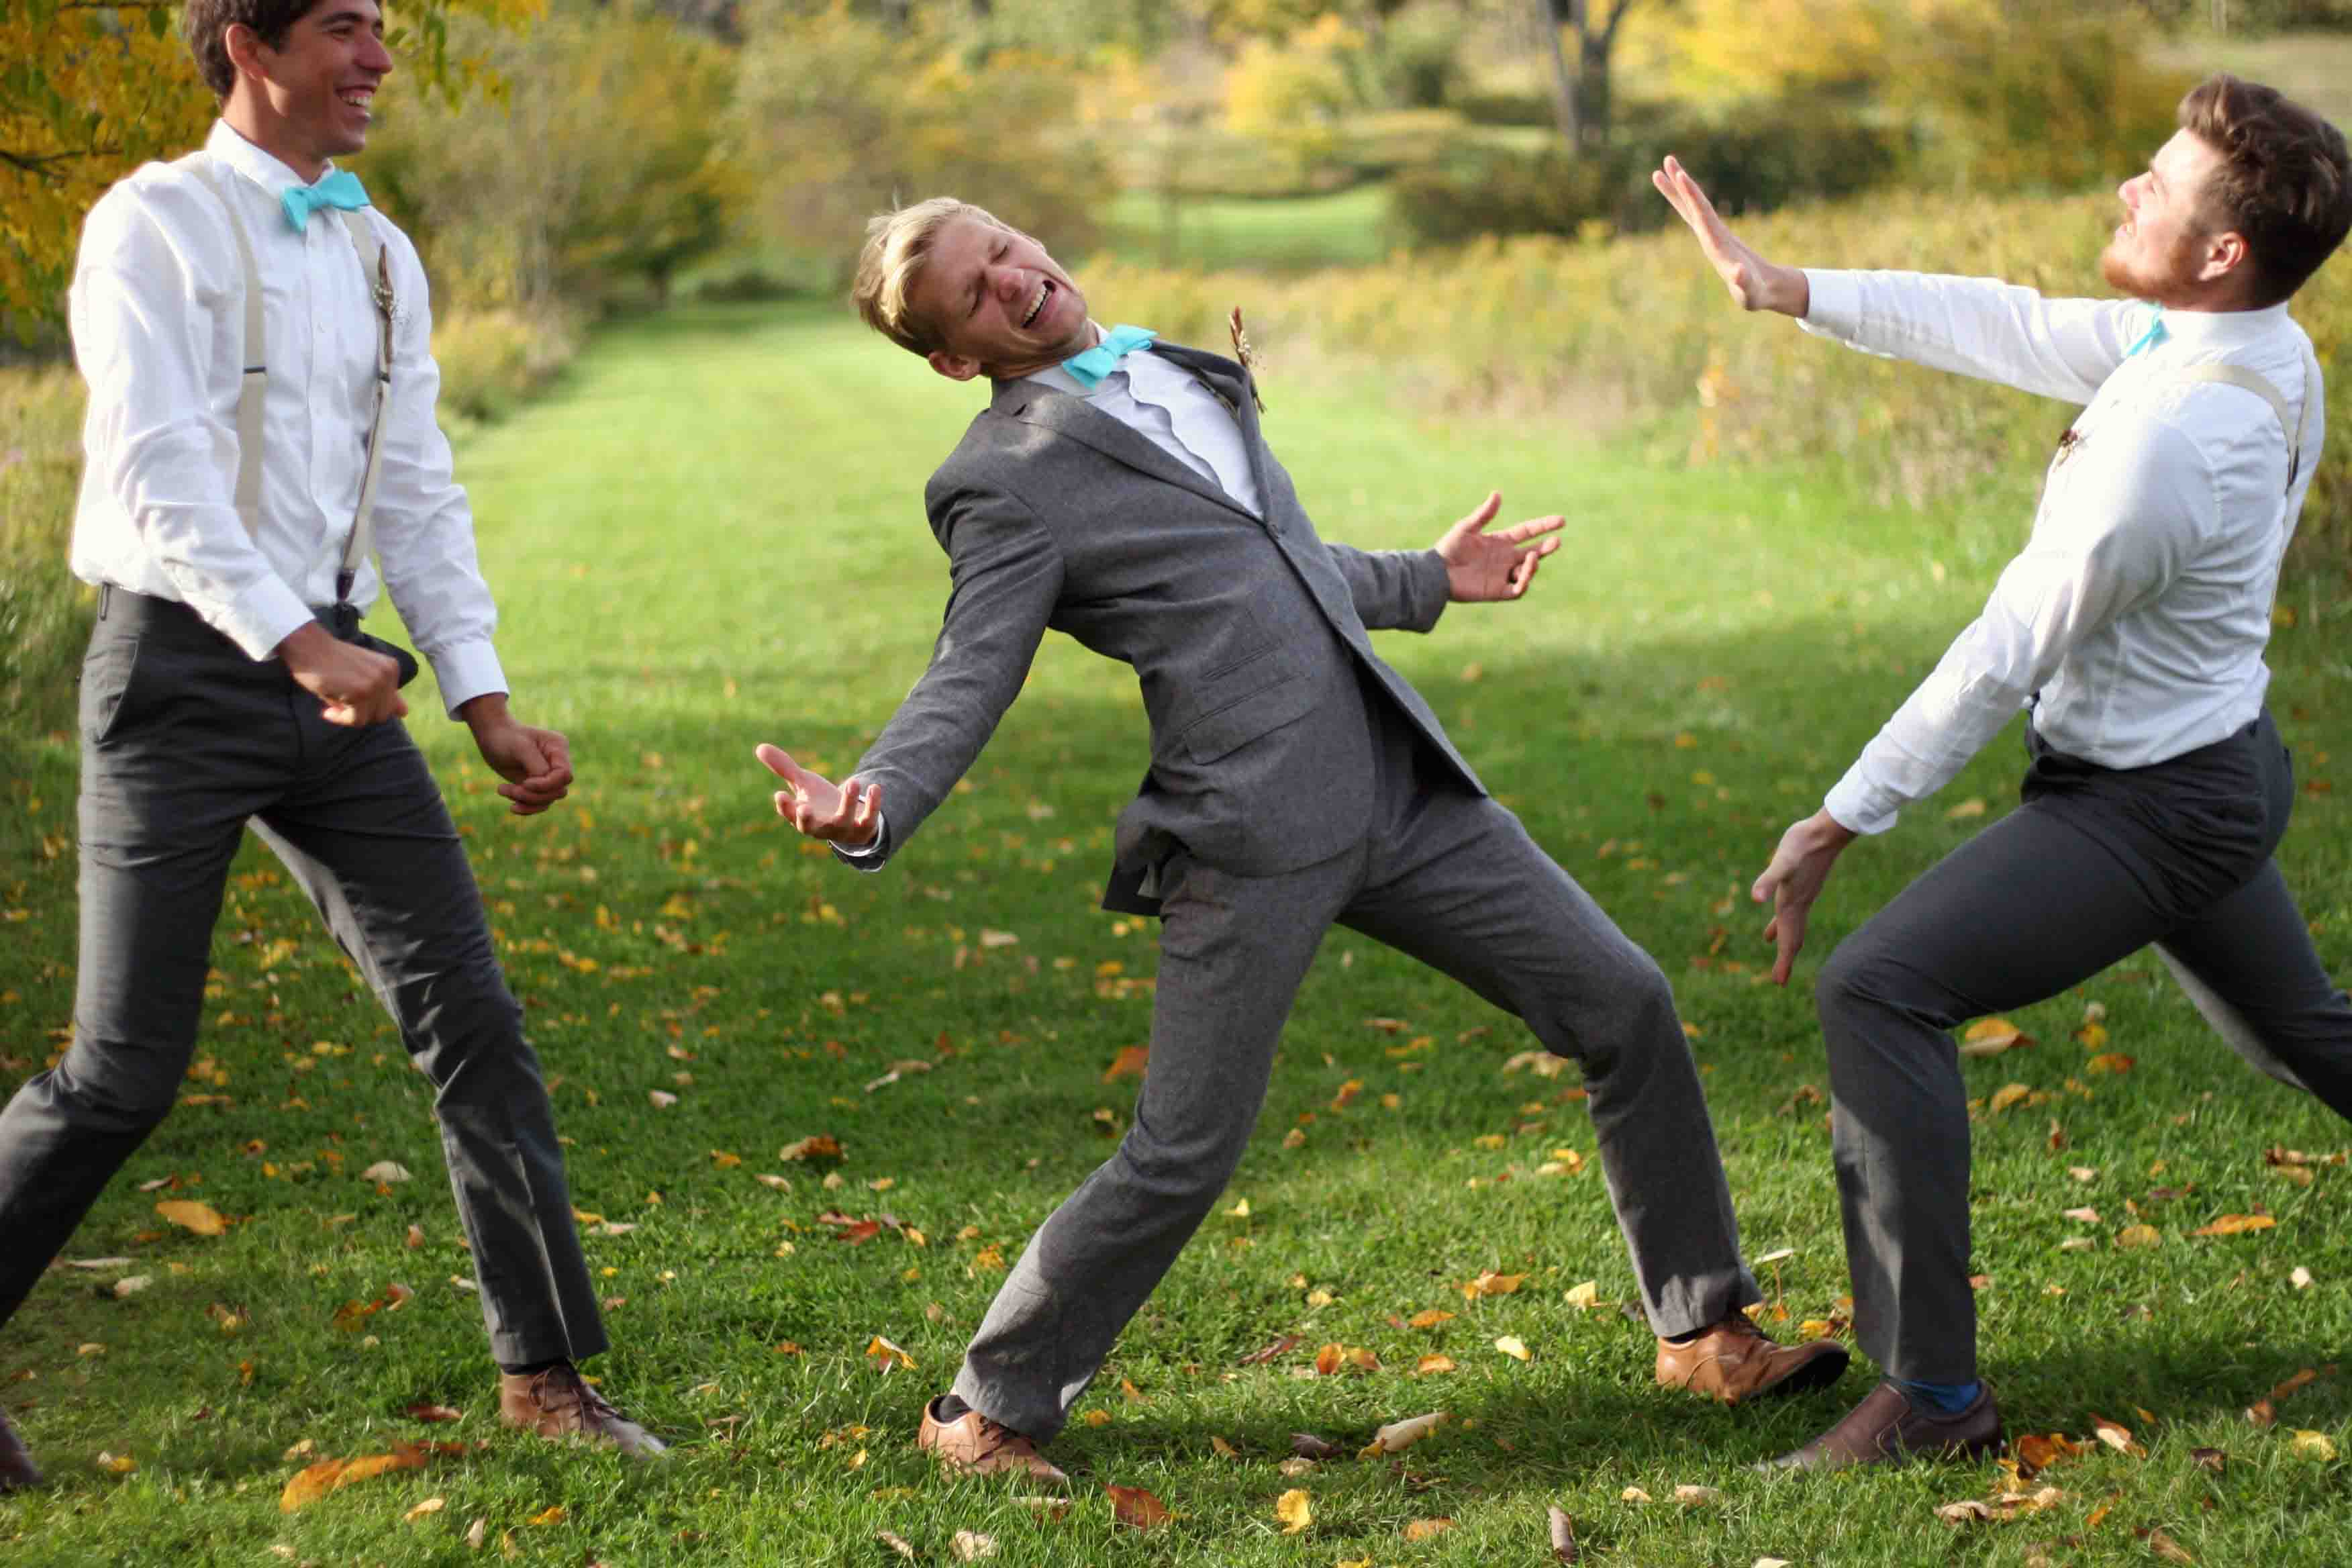 The groomsmen messing around with the force...